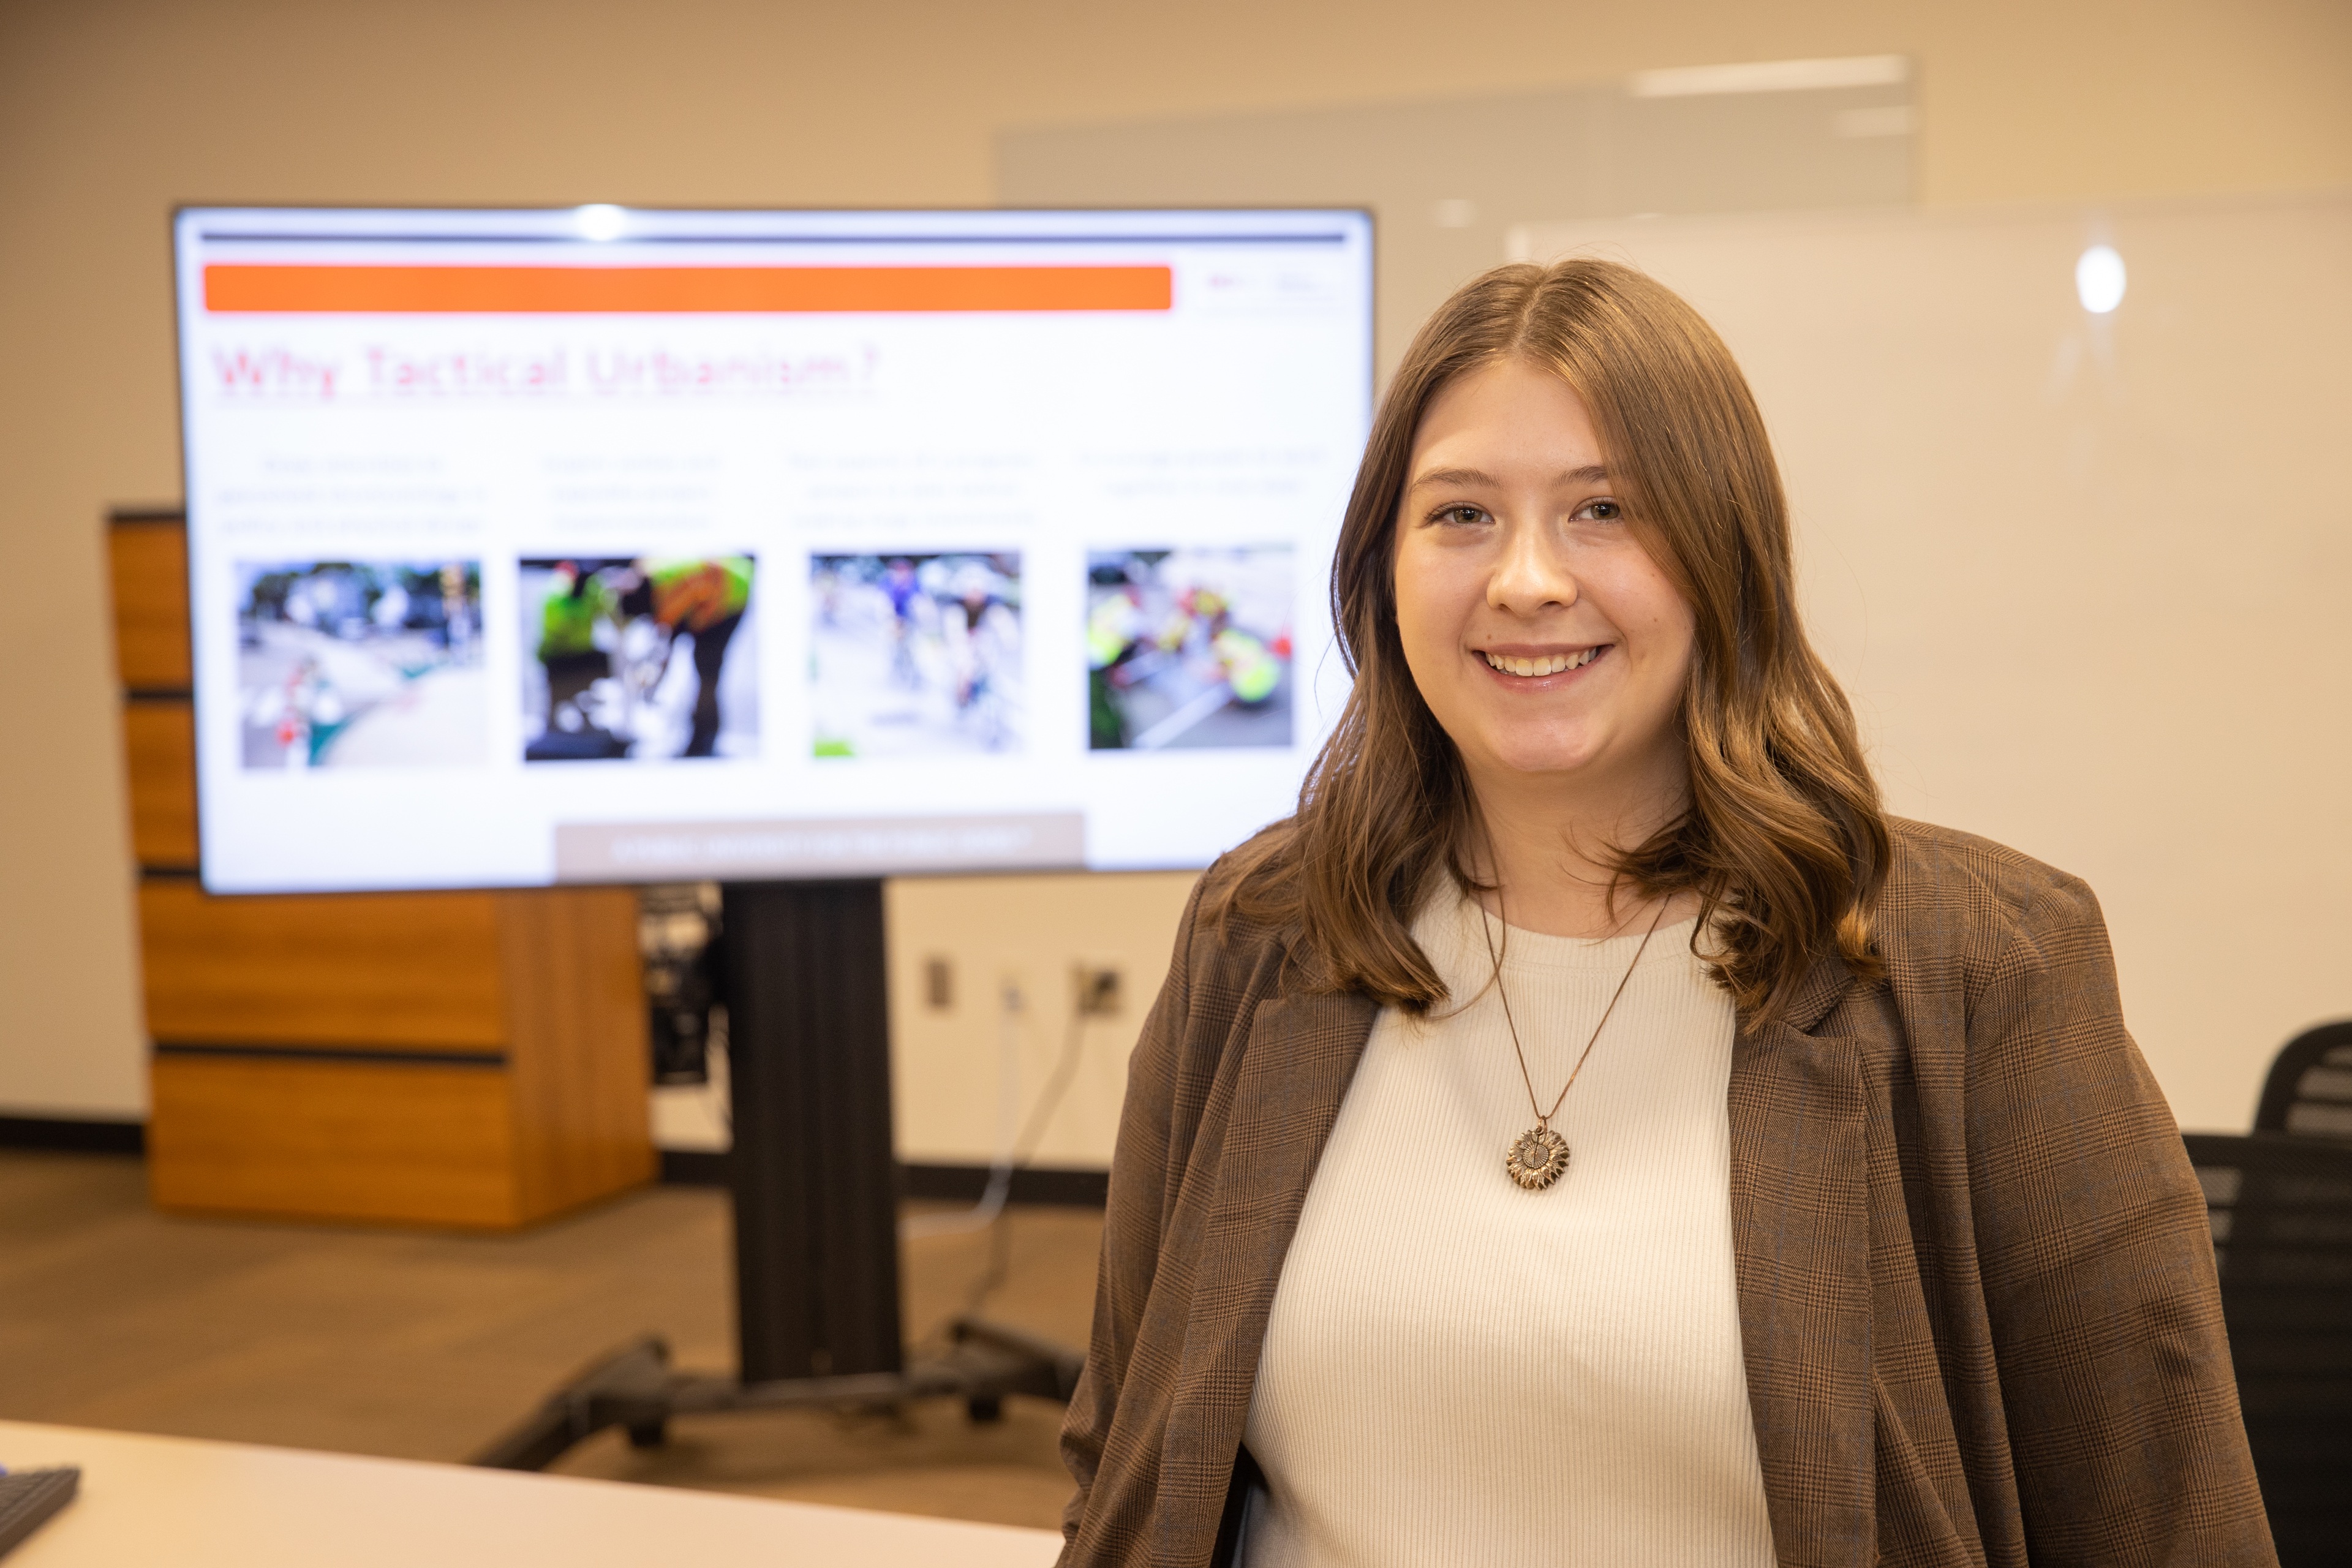 BGSU student poses in front of a large presentation screen